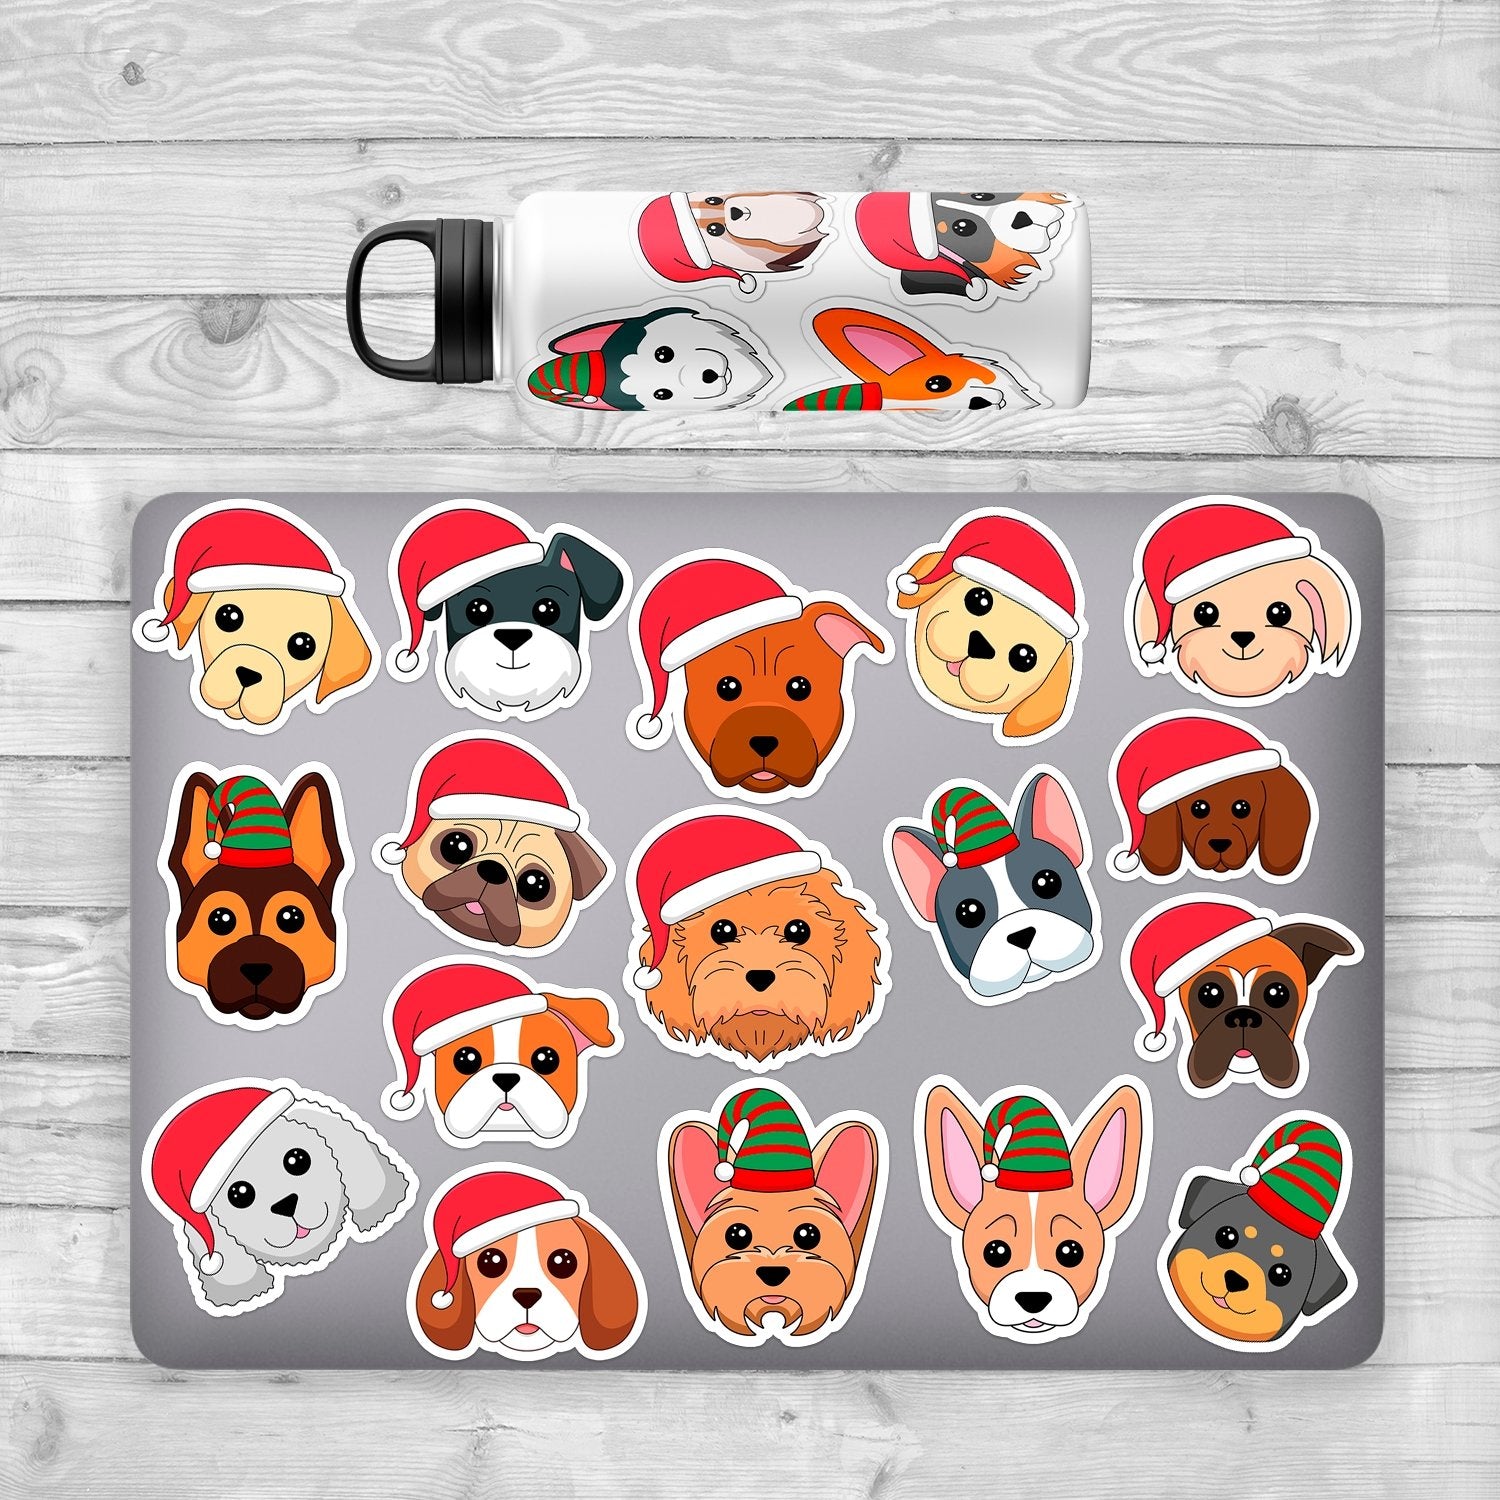 Goldendoodle Sticker - Christmas Santa Hat - Dogstickers.co